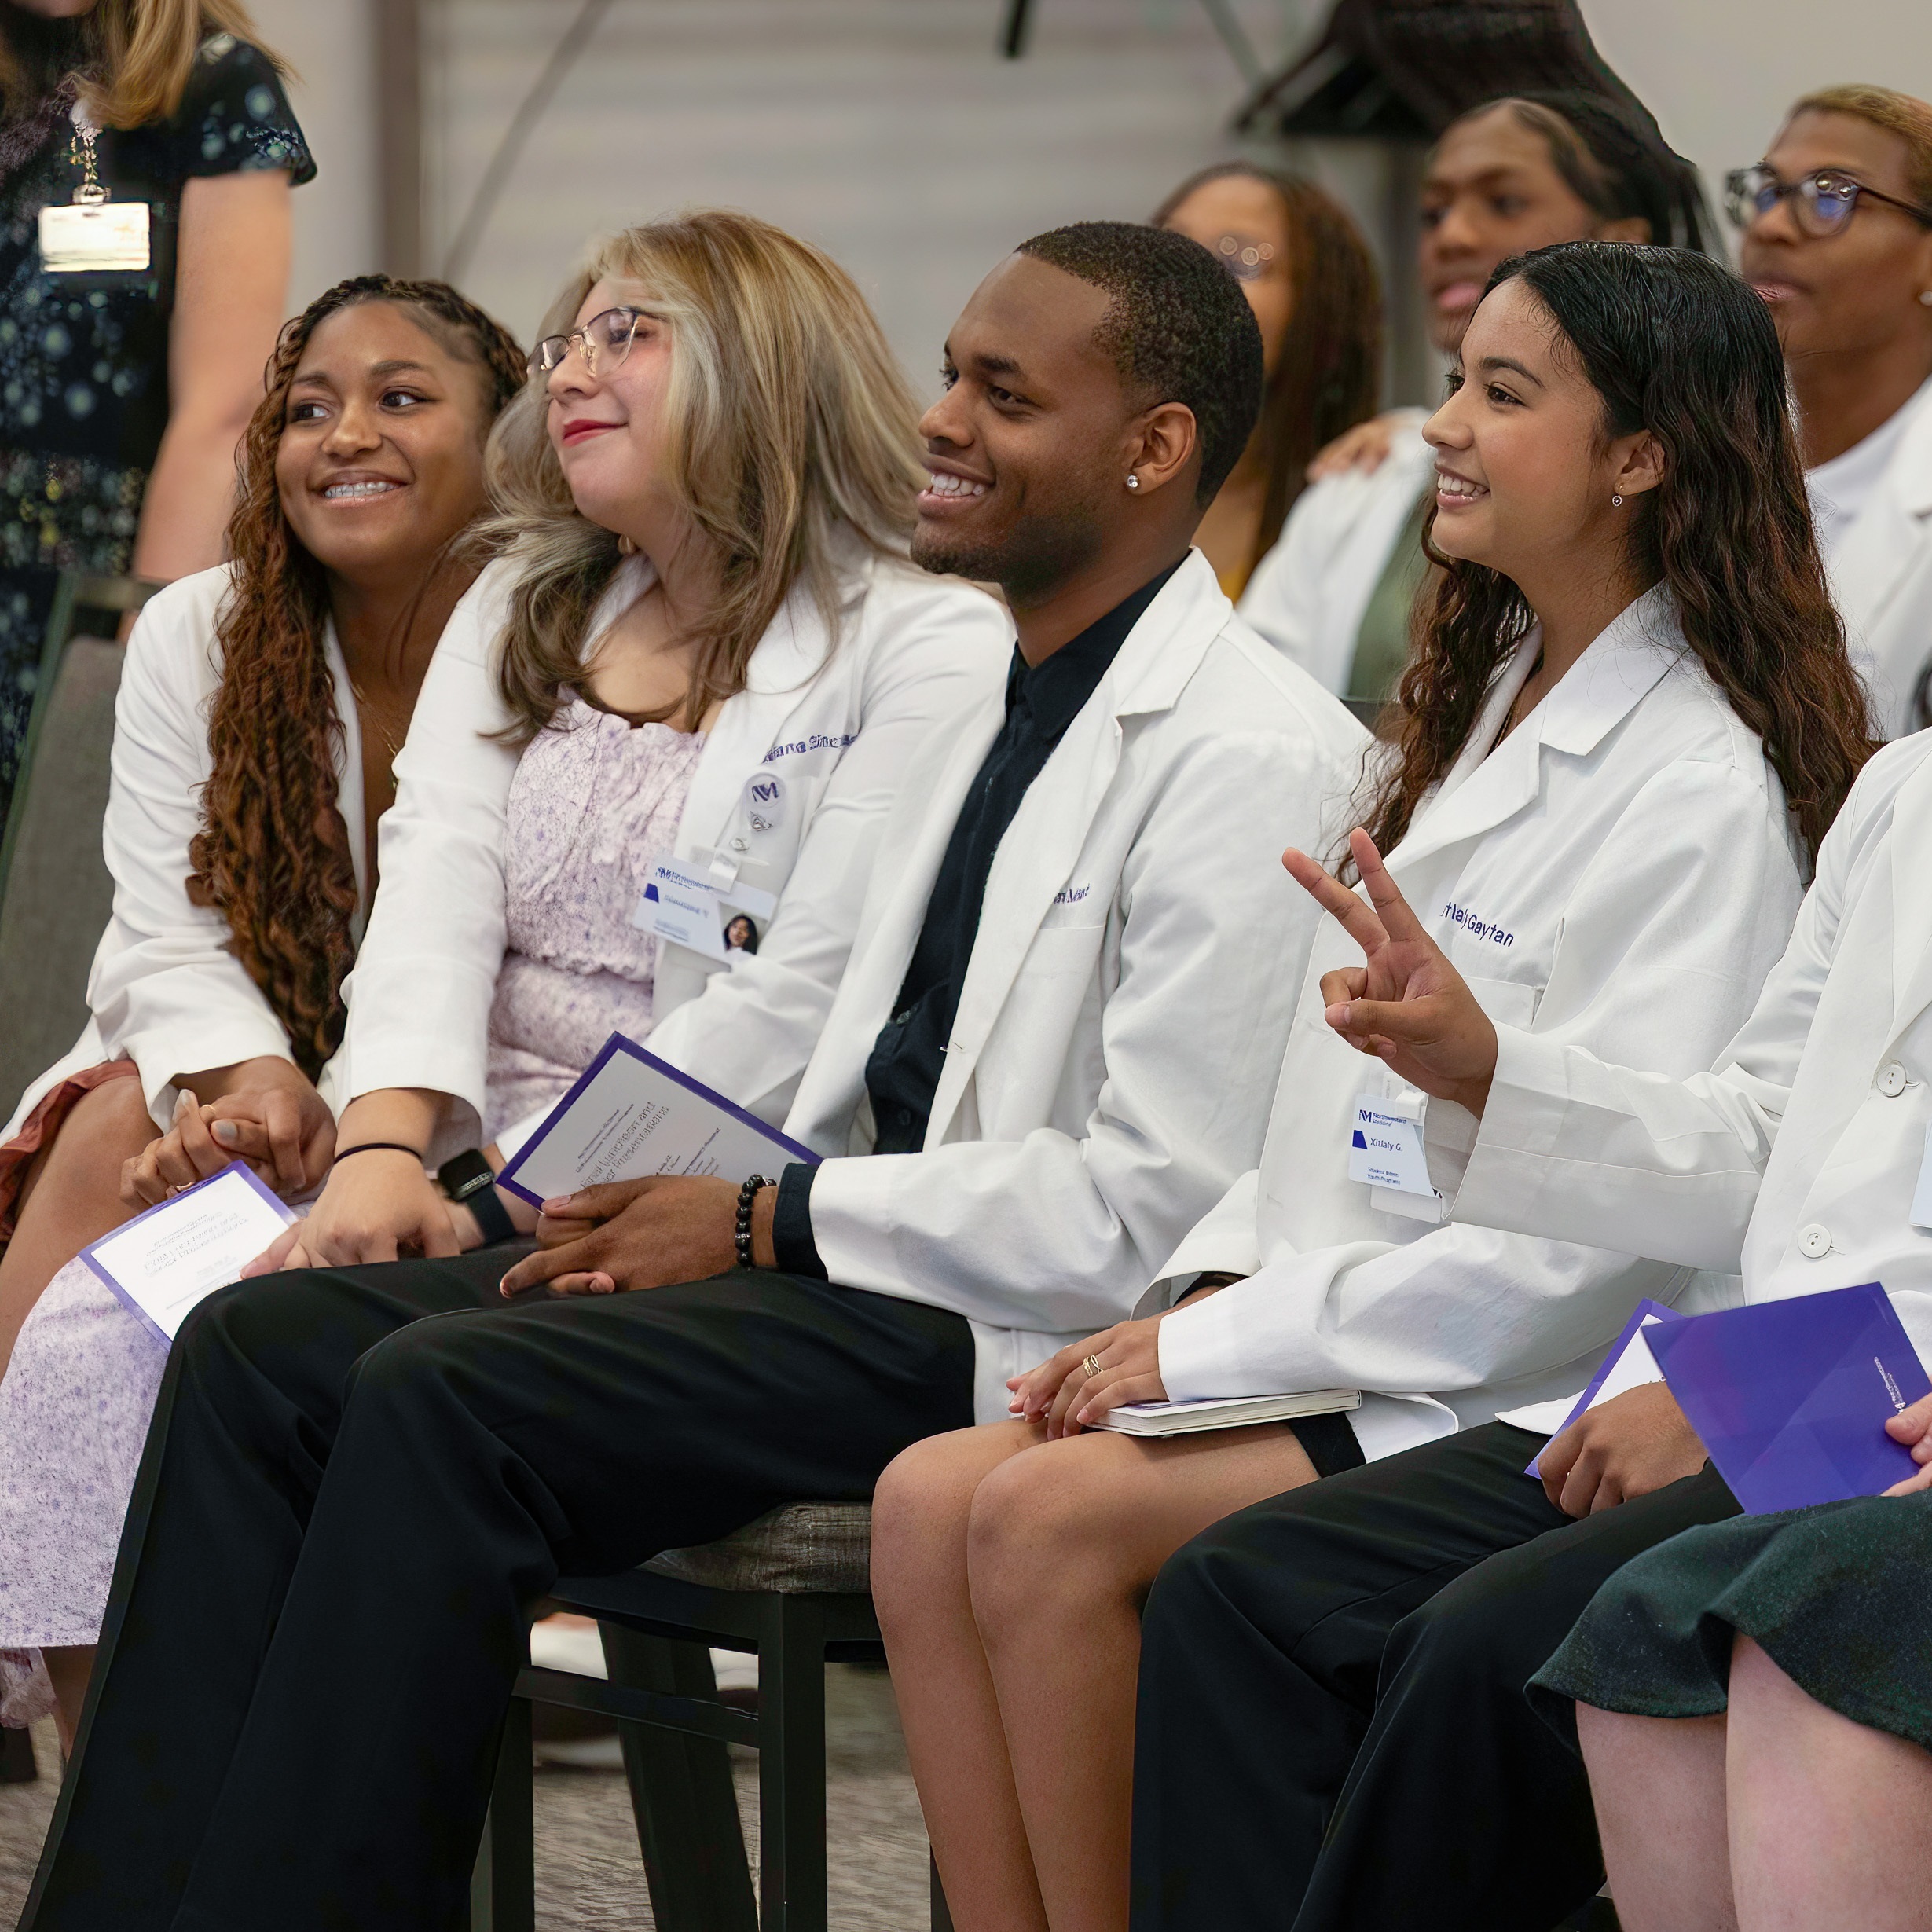 Students in the Scholars program sitting in an assembly wearing their white coats